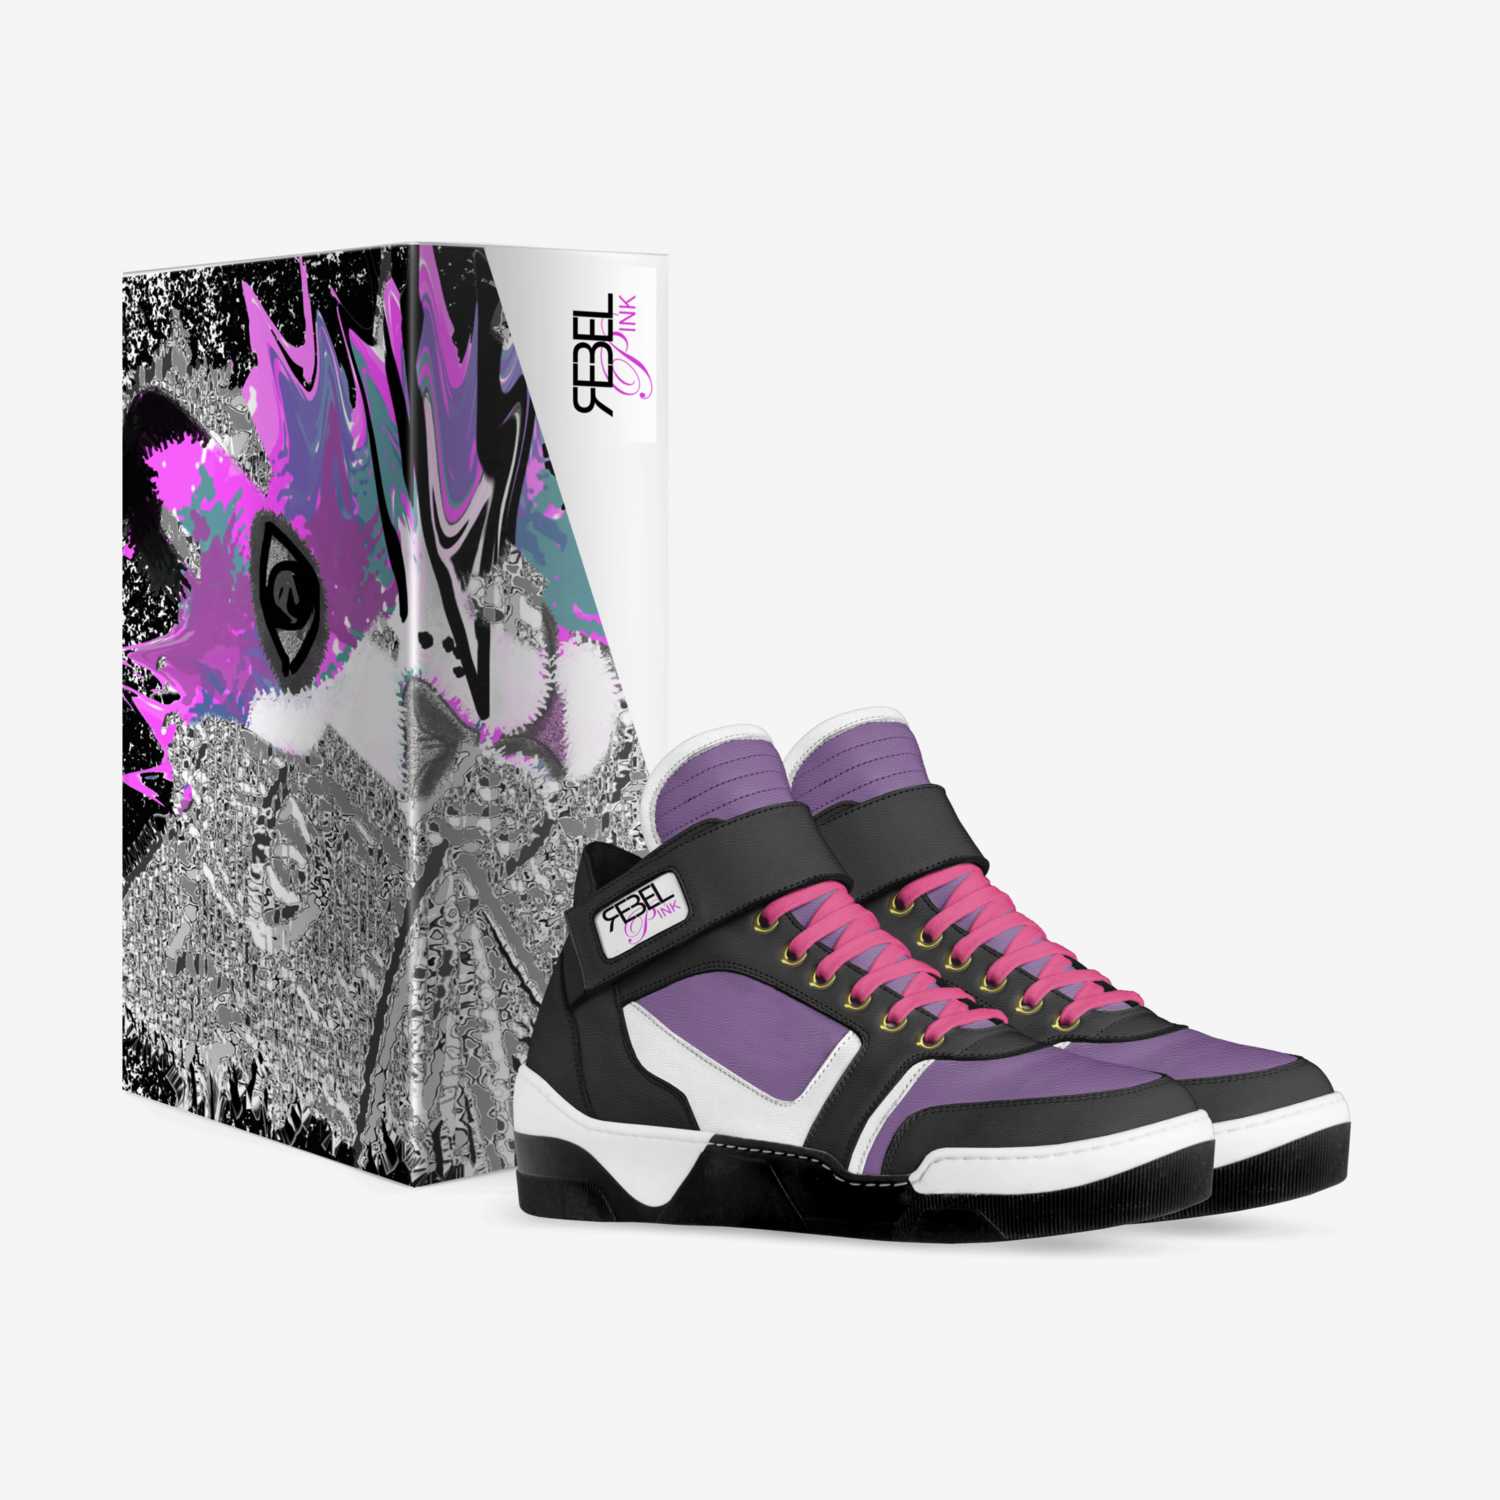 Rebel Pink Kix custom made in Italy shoes by Adrienne Steele | Box view